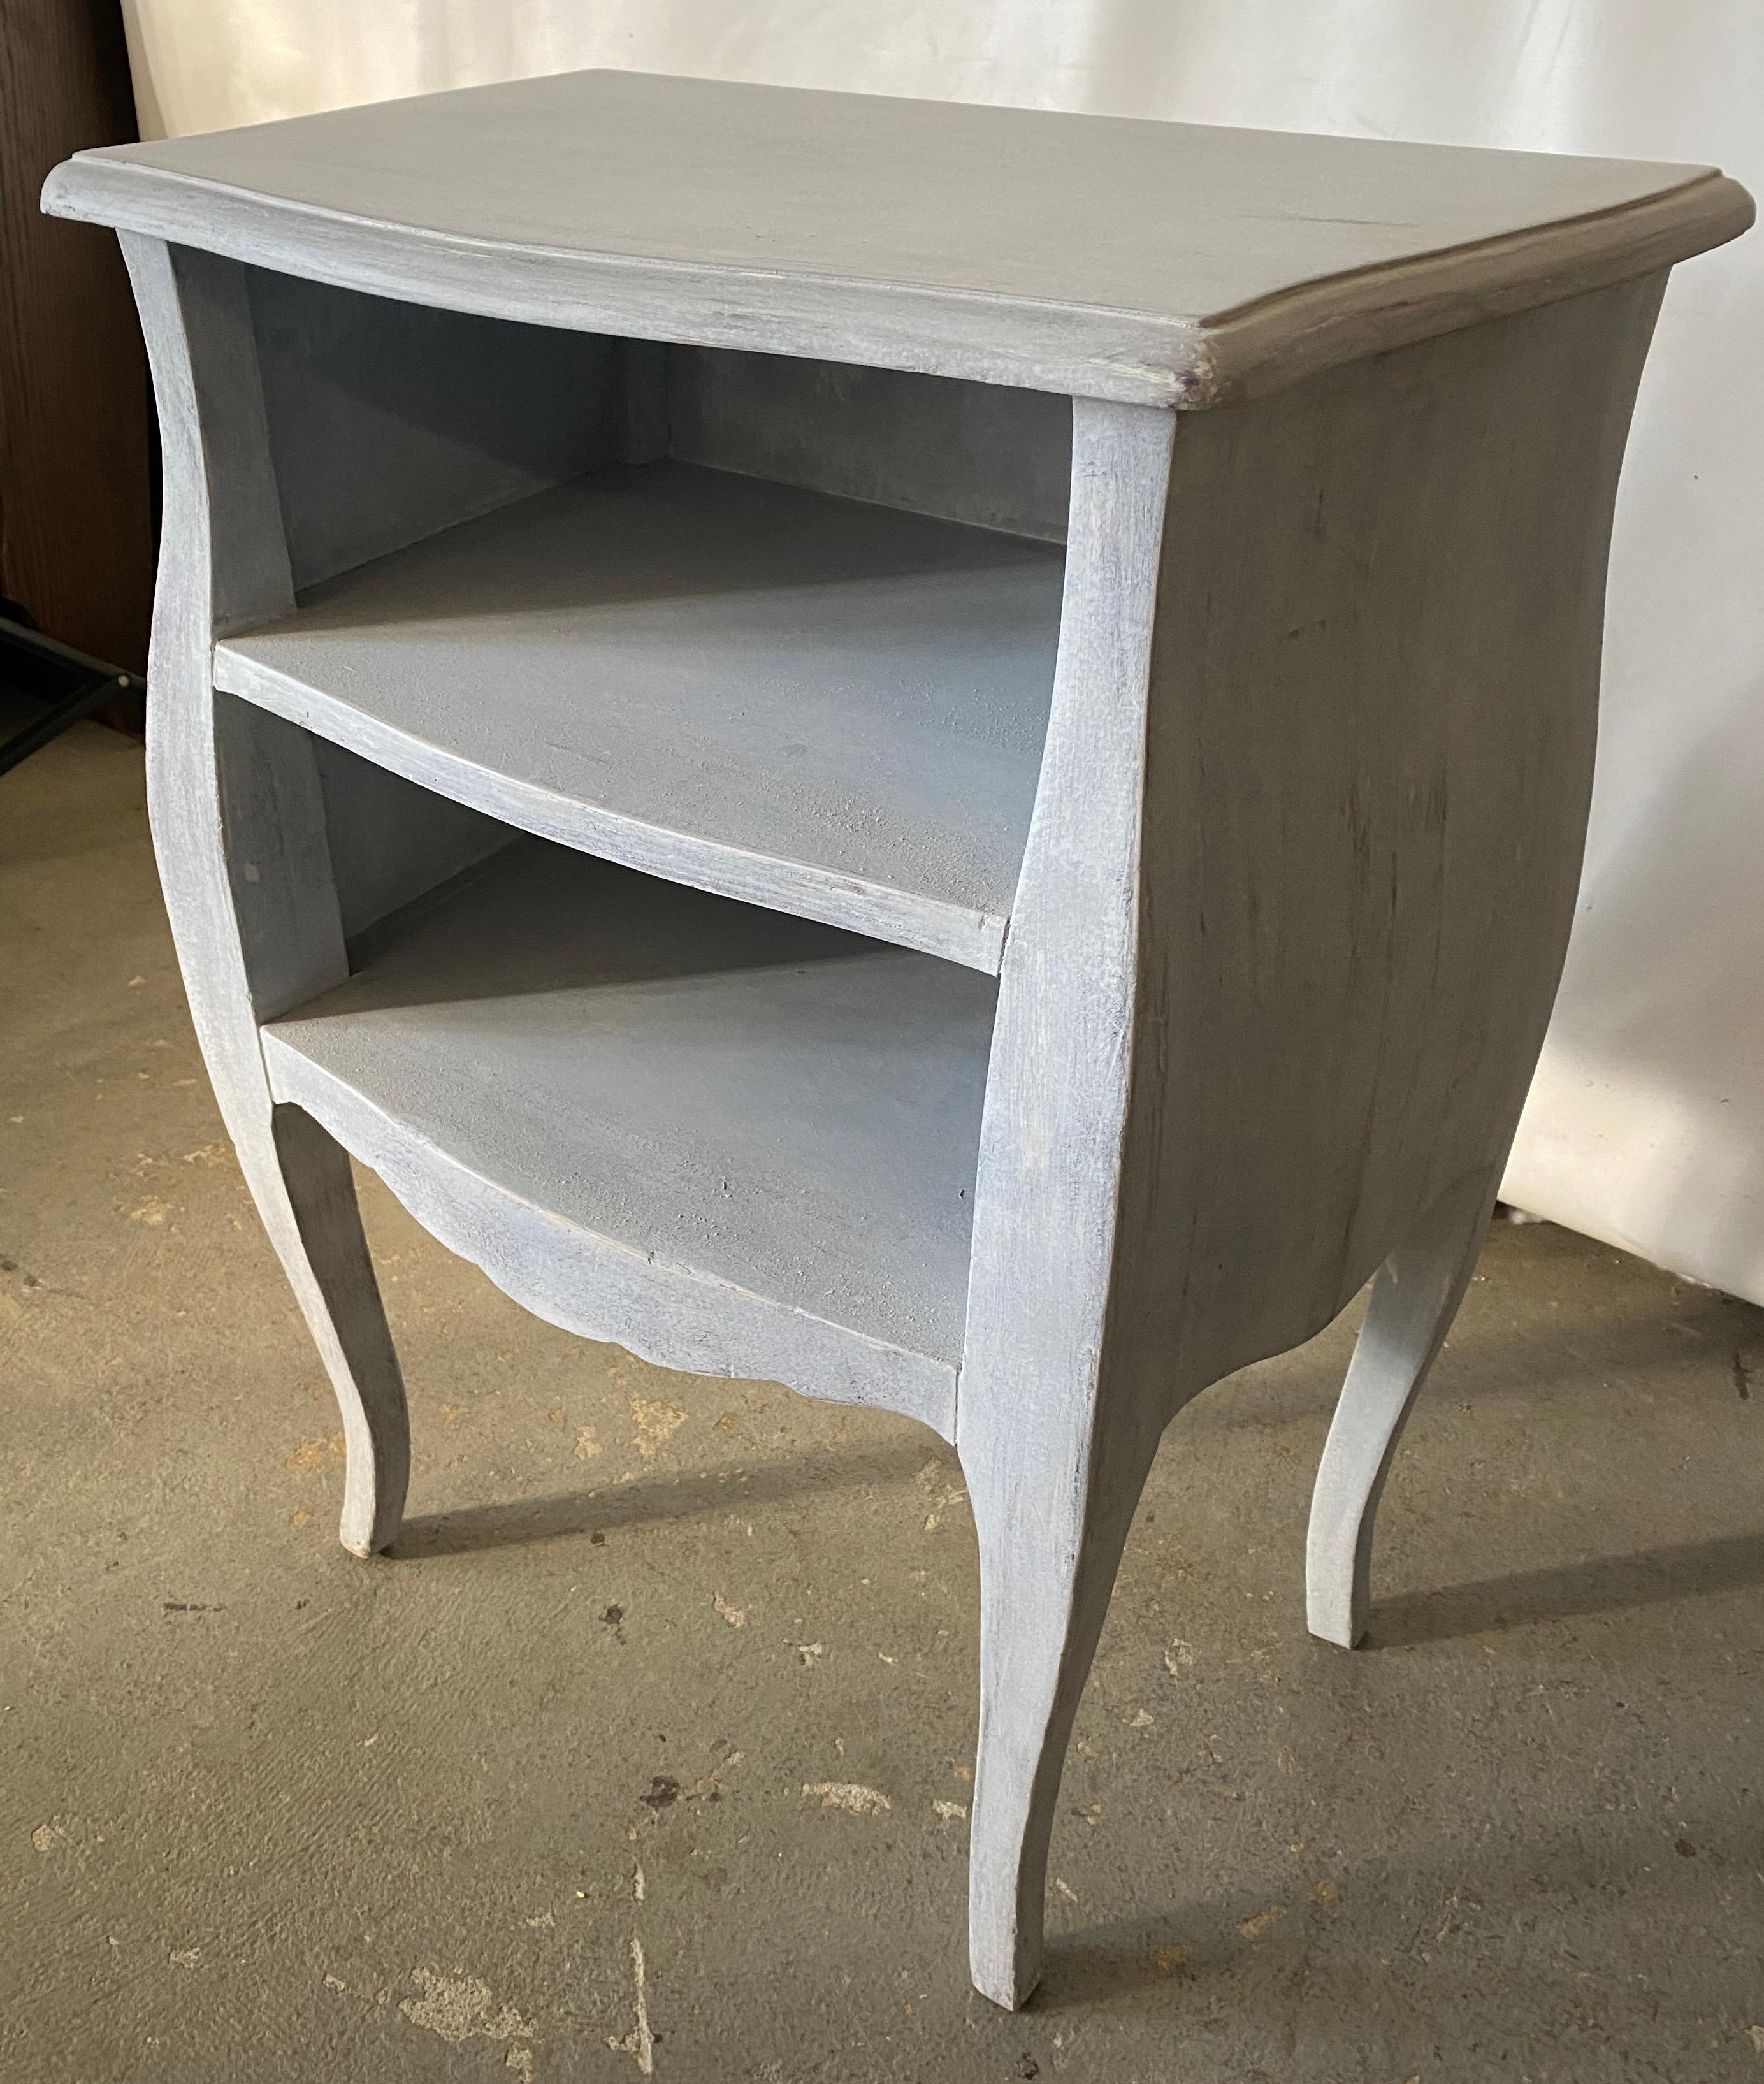 The French Provincial style painted grey nightstand has two open shelves for storage. This night table or stand will fill the bill if you are searching for a Swedish Gustavian, neoclassical or classical design.
  